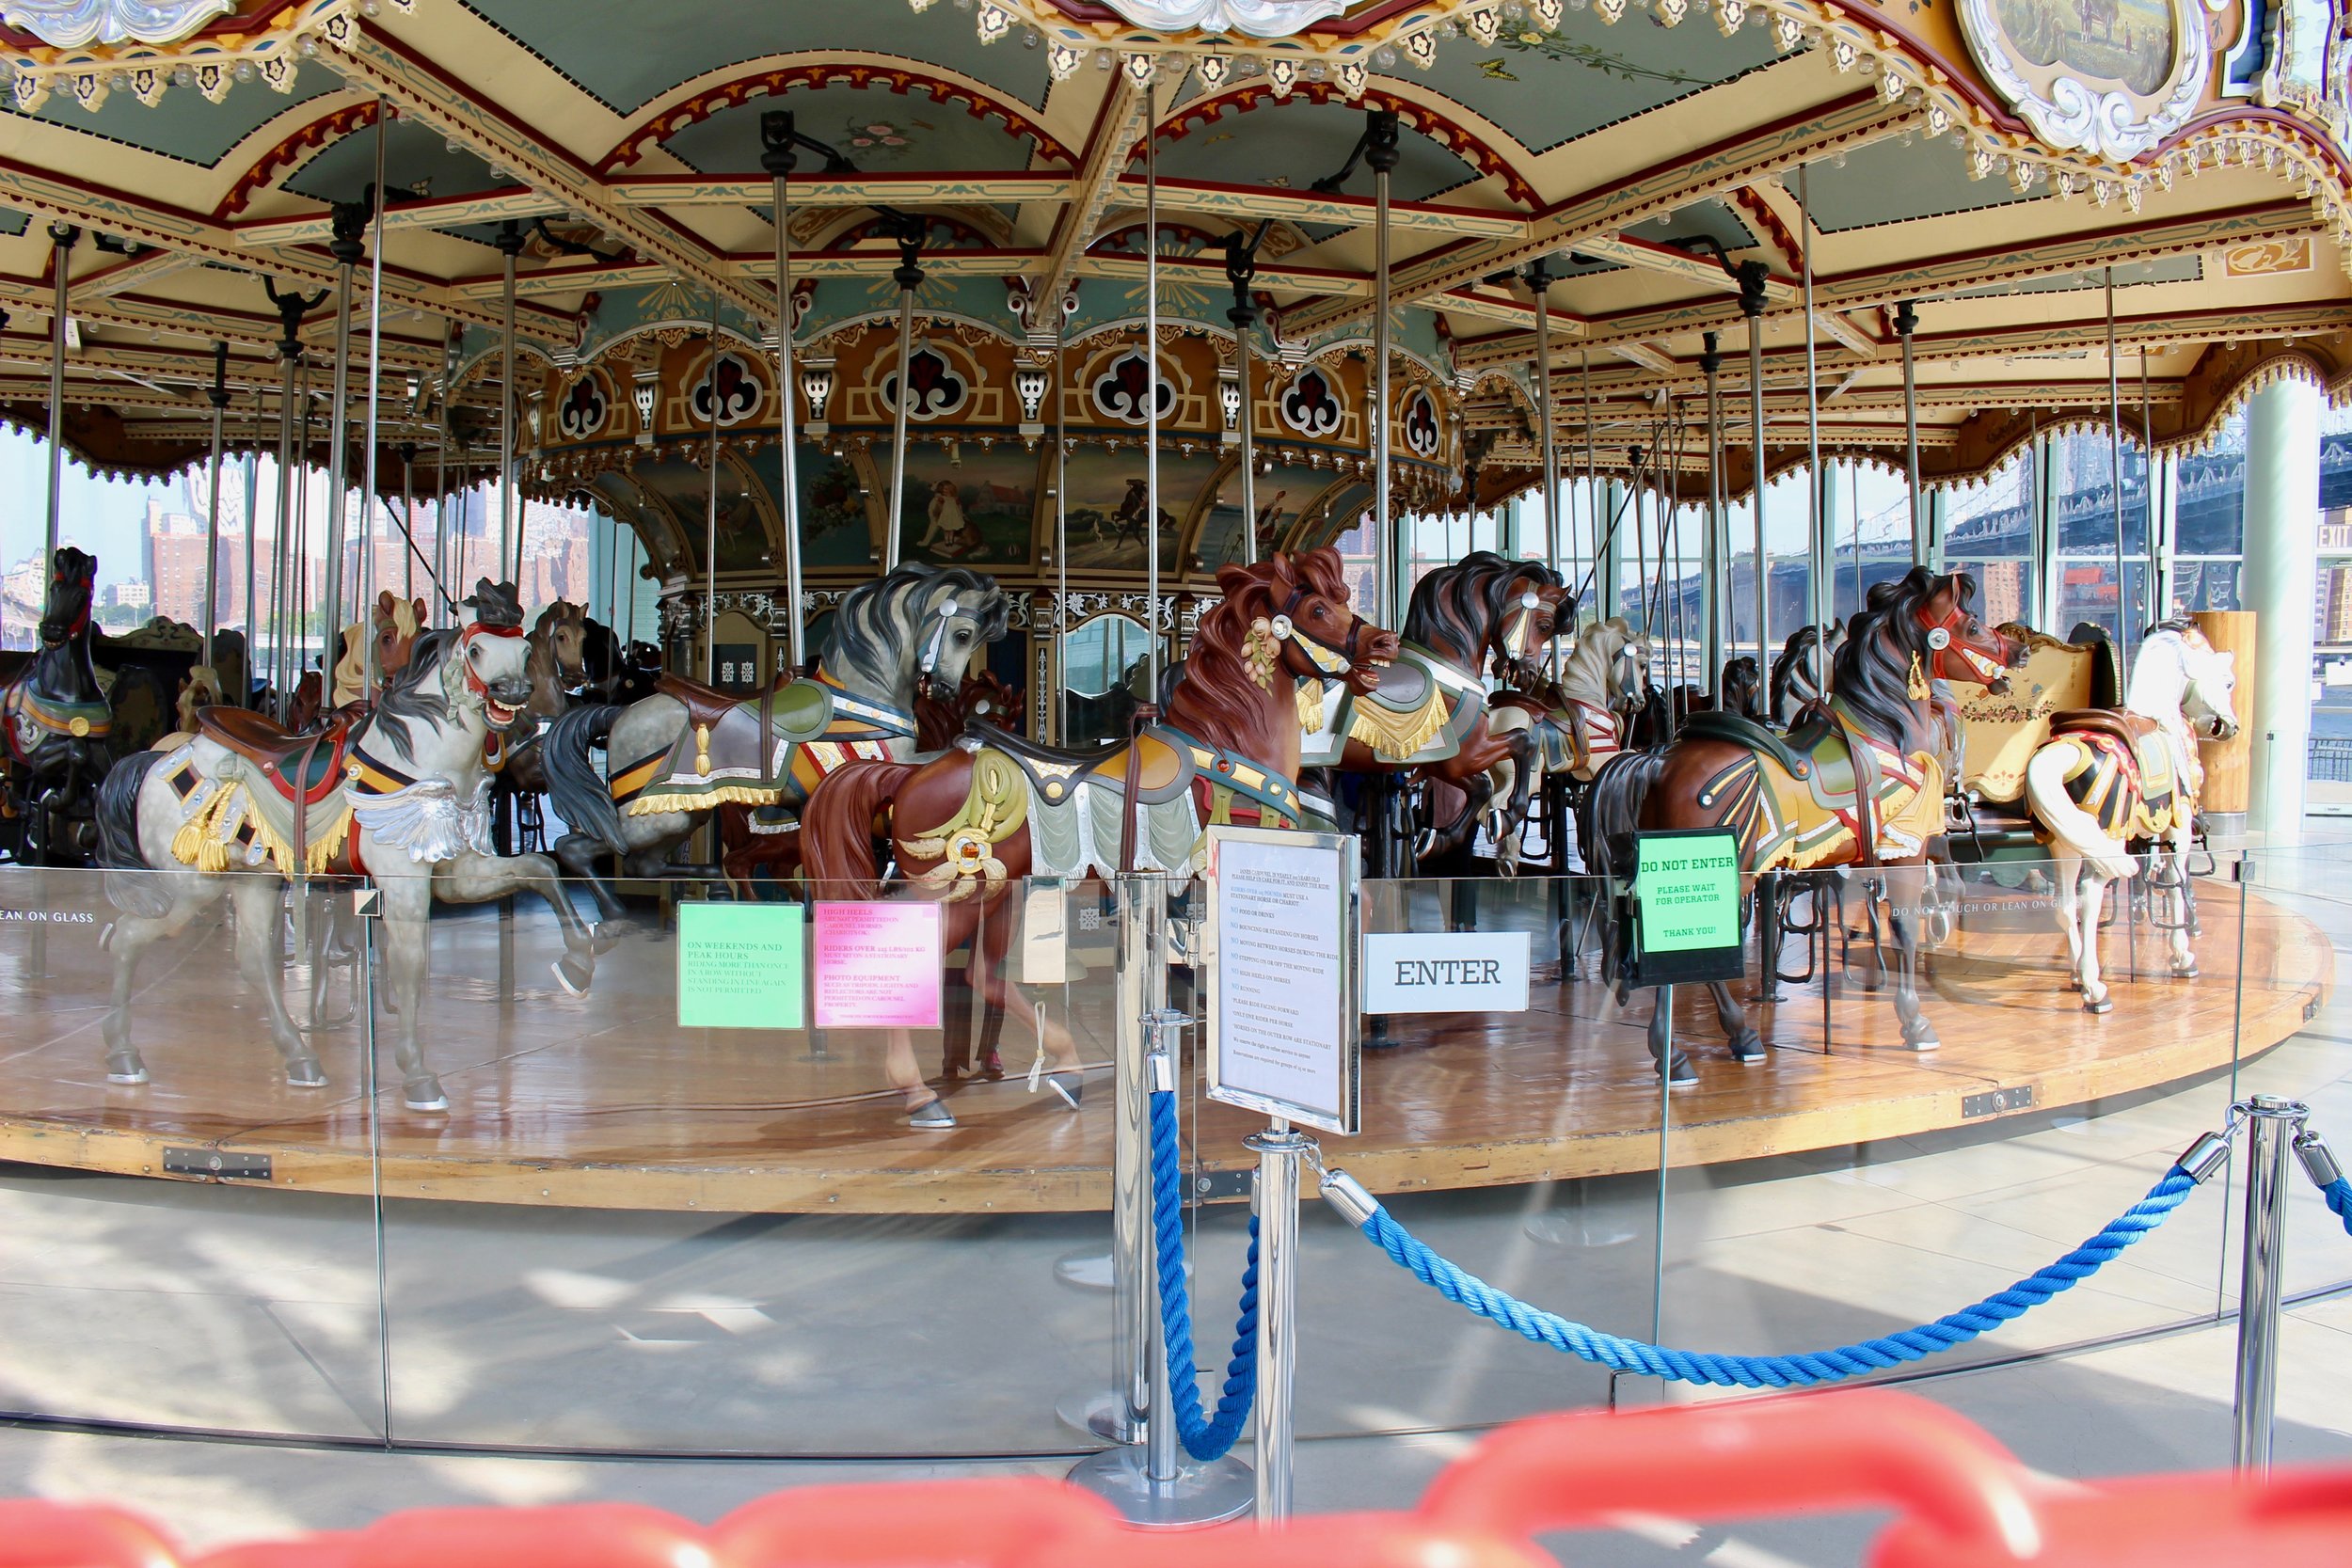  The Carousel, not yet open for the day.&nbsp; The place where children dream and their imaginations run freely.&nbsp; Hummingbird has a great story set at Jane's Carousel,&nbsp;  Magic.   